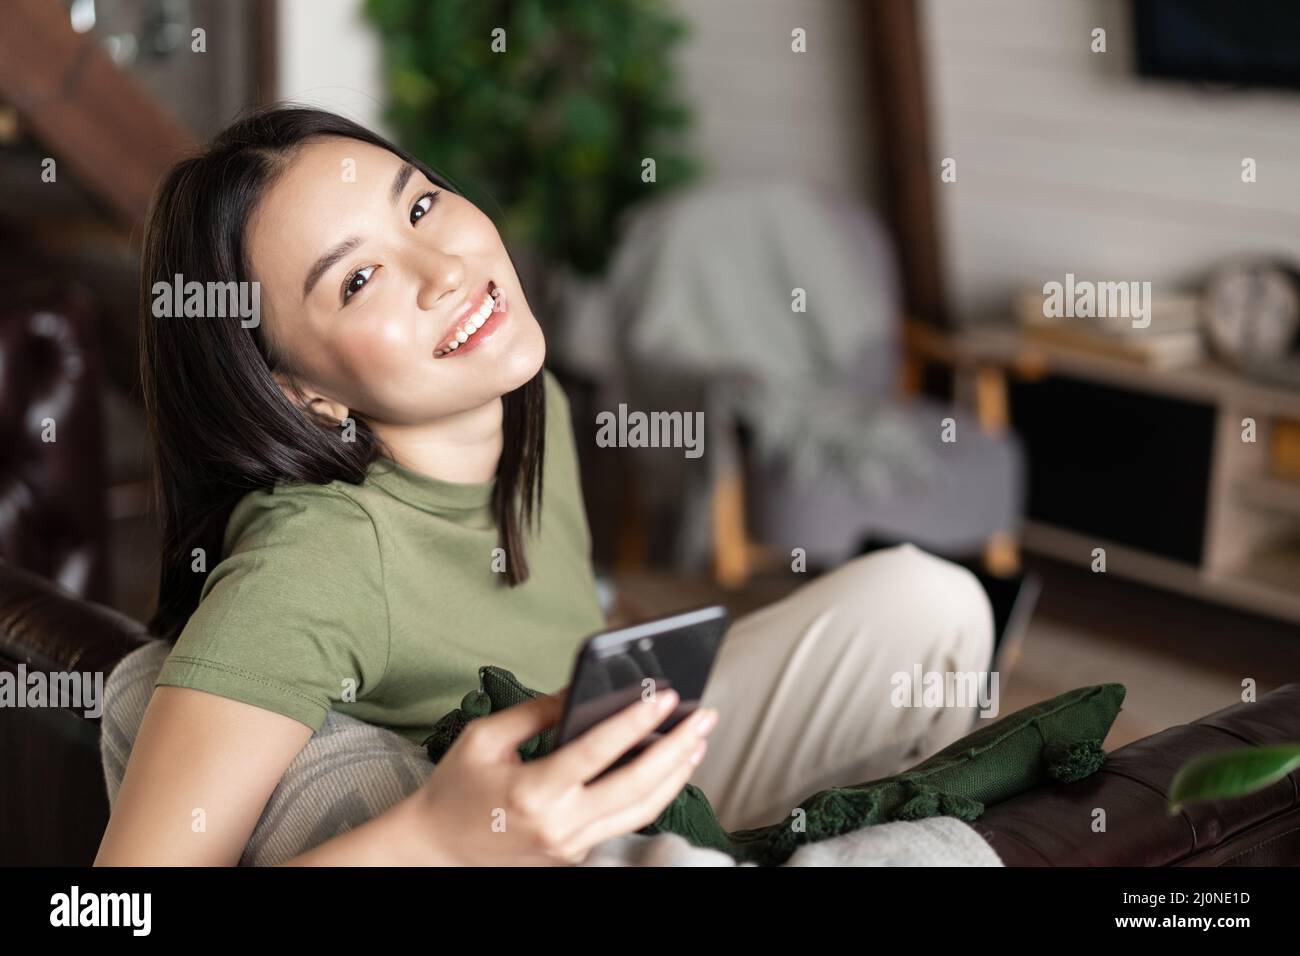 Dreamy smiling asian woman using mobile phone, sitting and relaxing at home Stock Photo